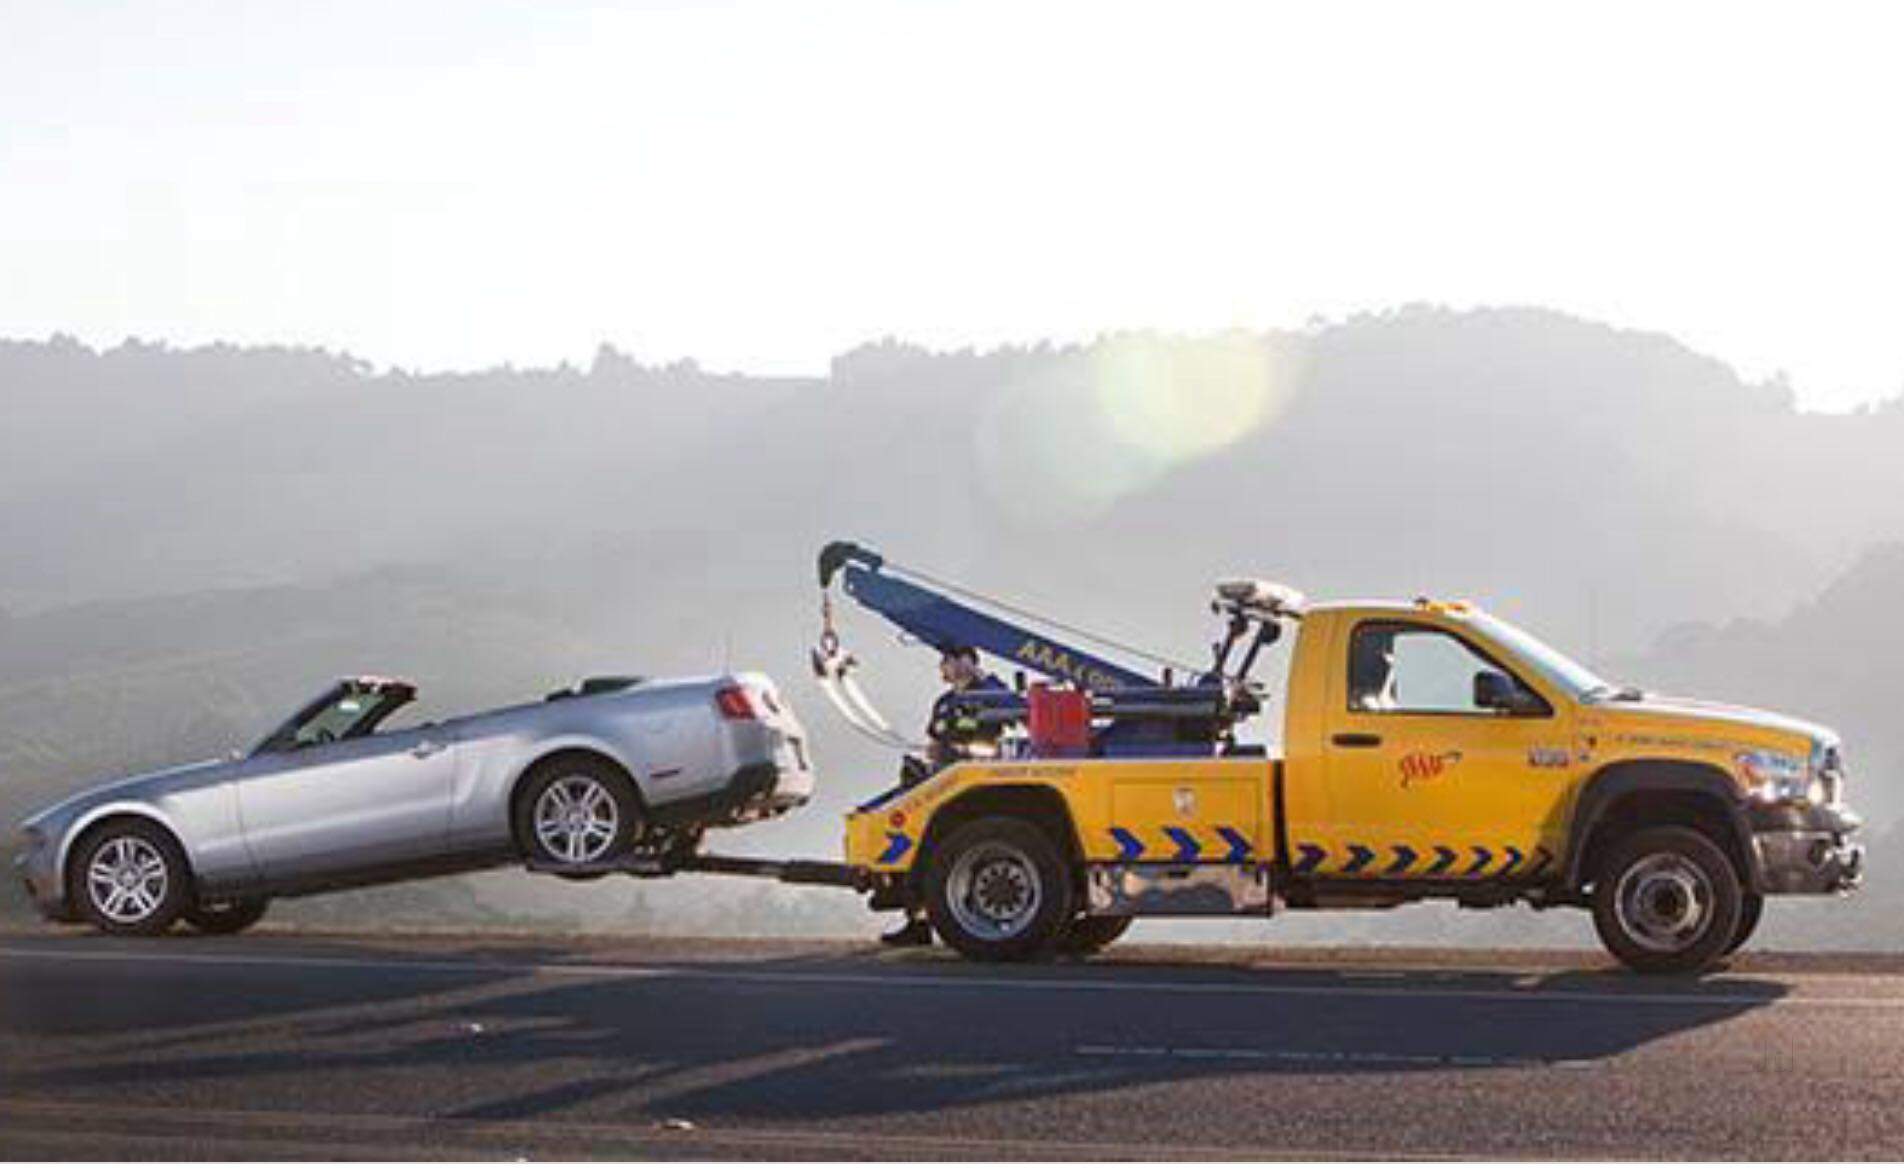 Quick Line Recovery - 24/7 VEHICLE BREAKDOWN RECOVERY